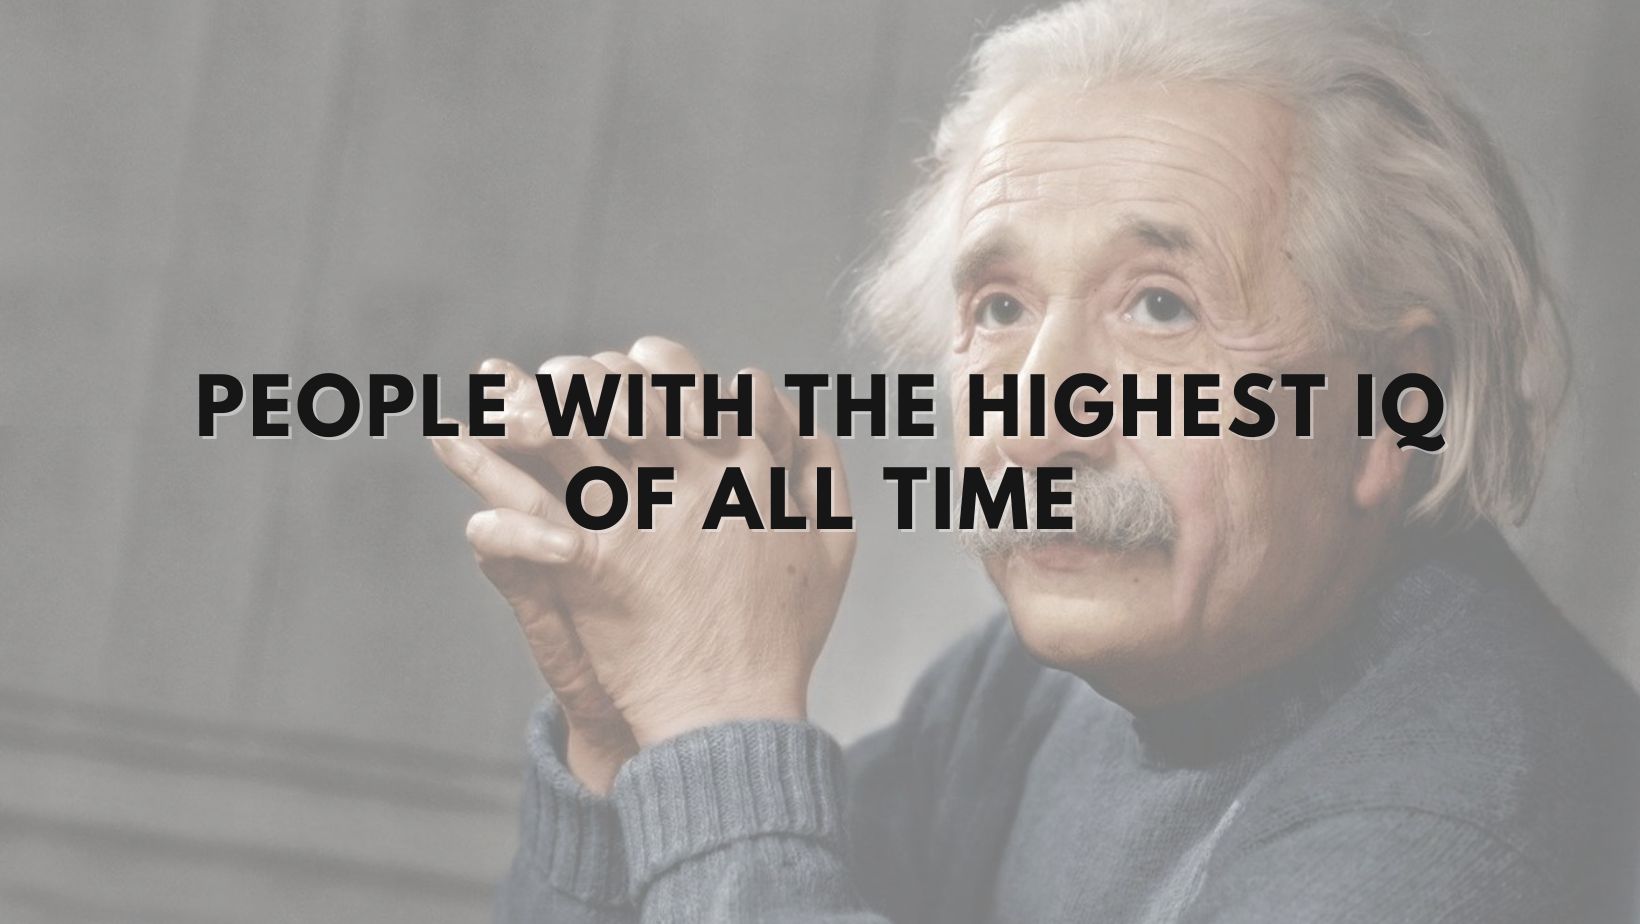 The Man With the Highest IQ to Ever Walk on Earth — Steemit